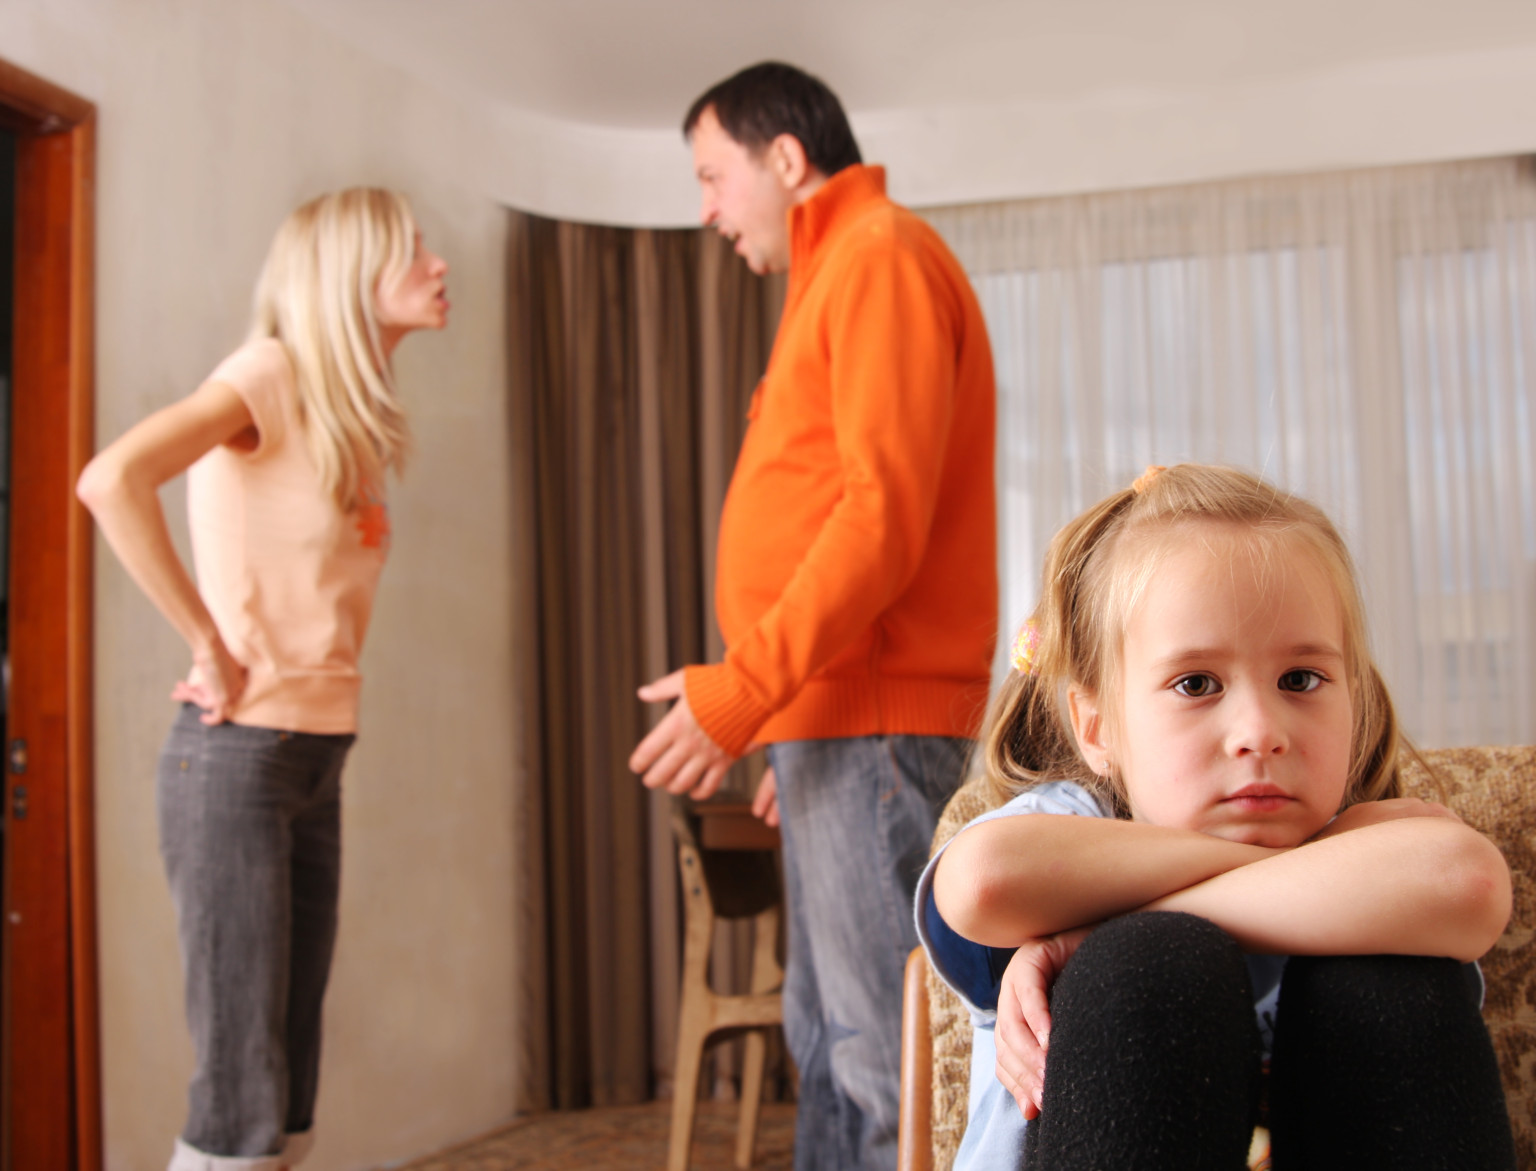 The Most Serious Mistakes Made by Divorced Parents